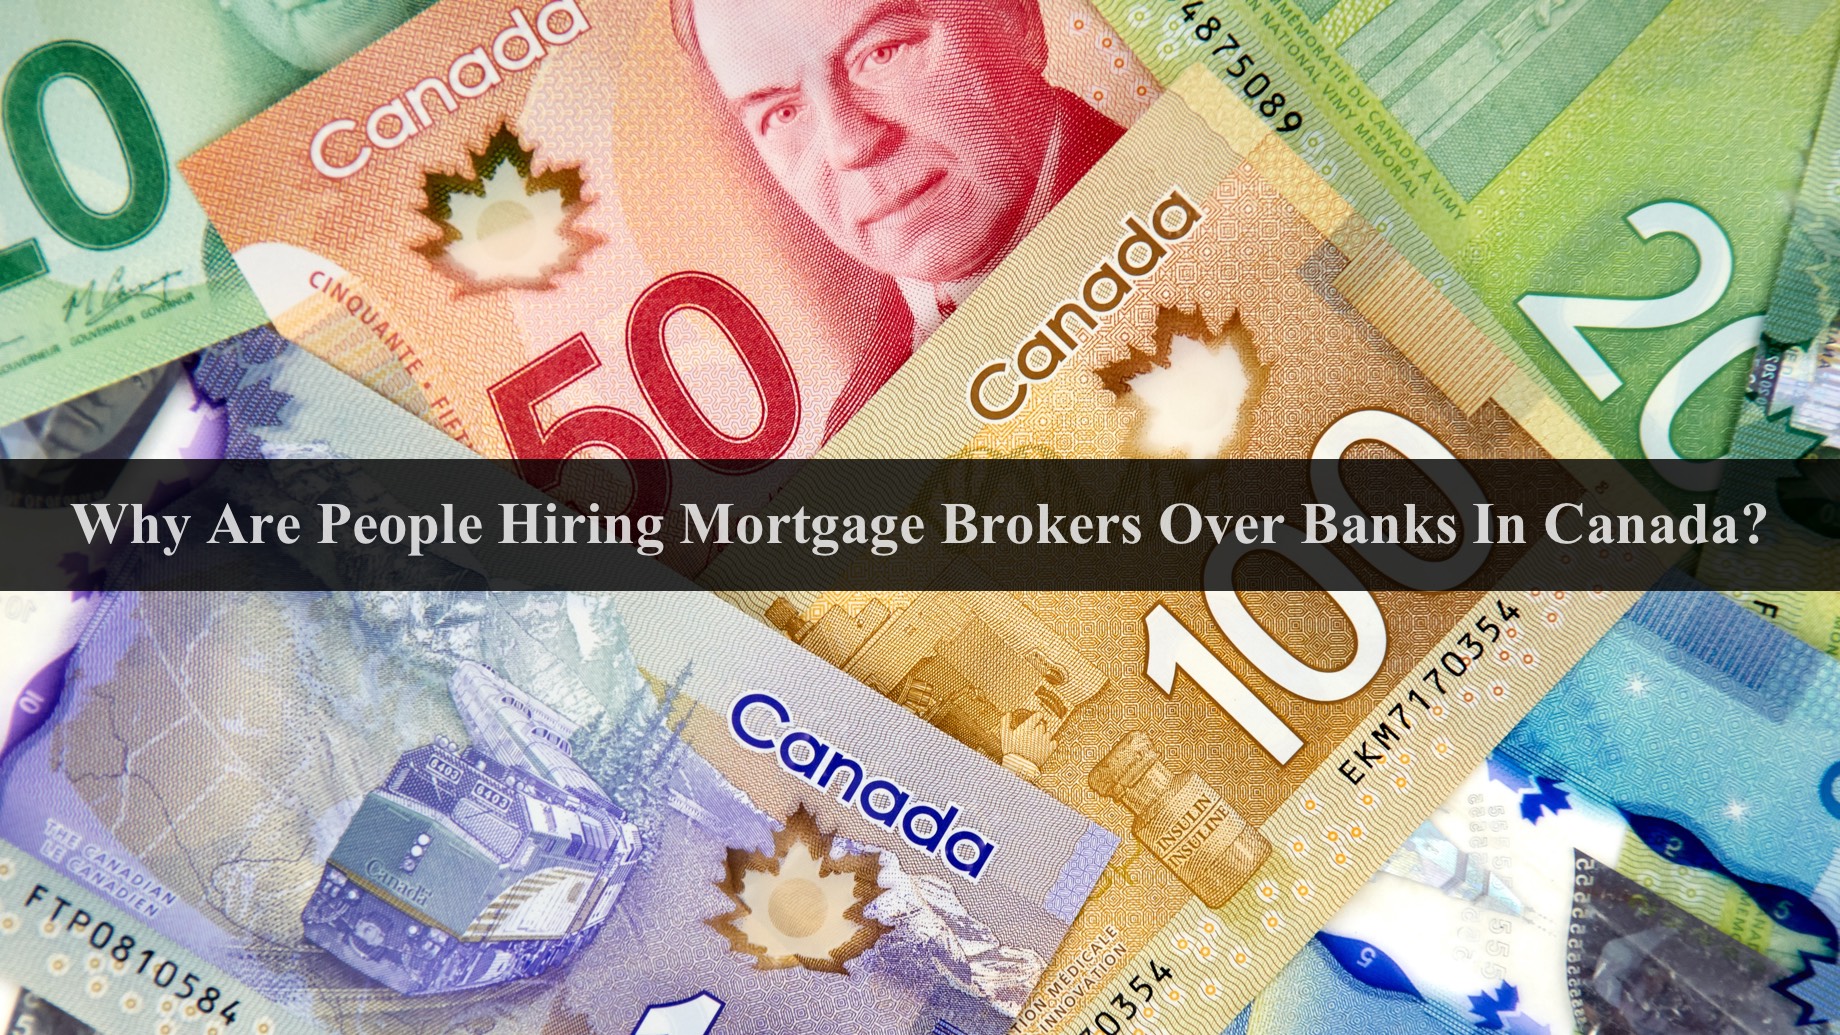 Why Are People Hiring Mortgage Brokers Over Banks In Canada?